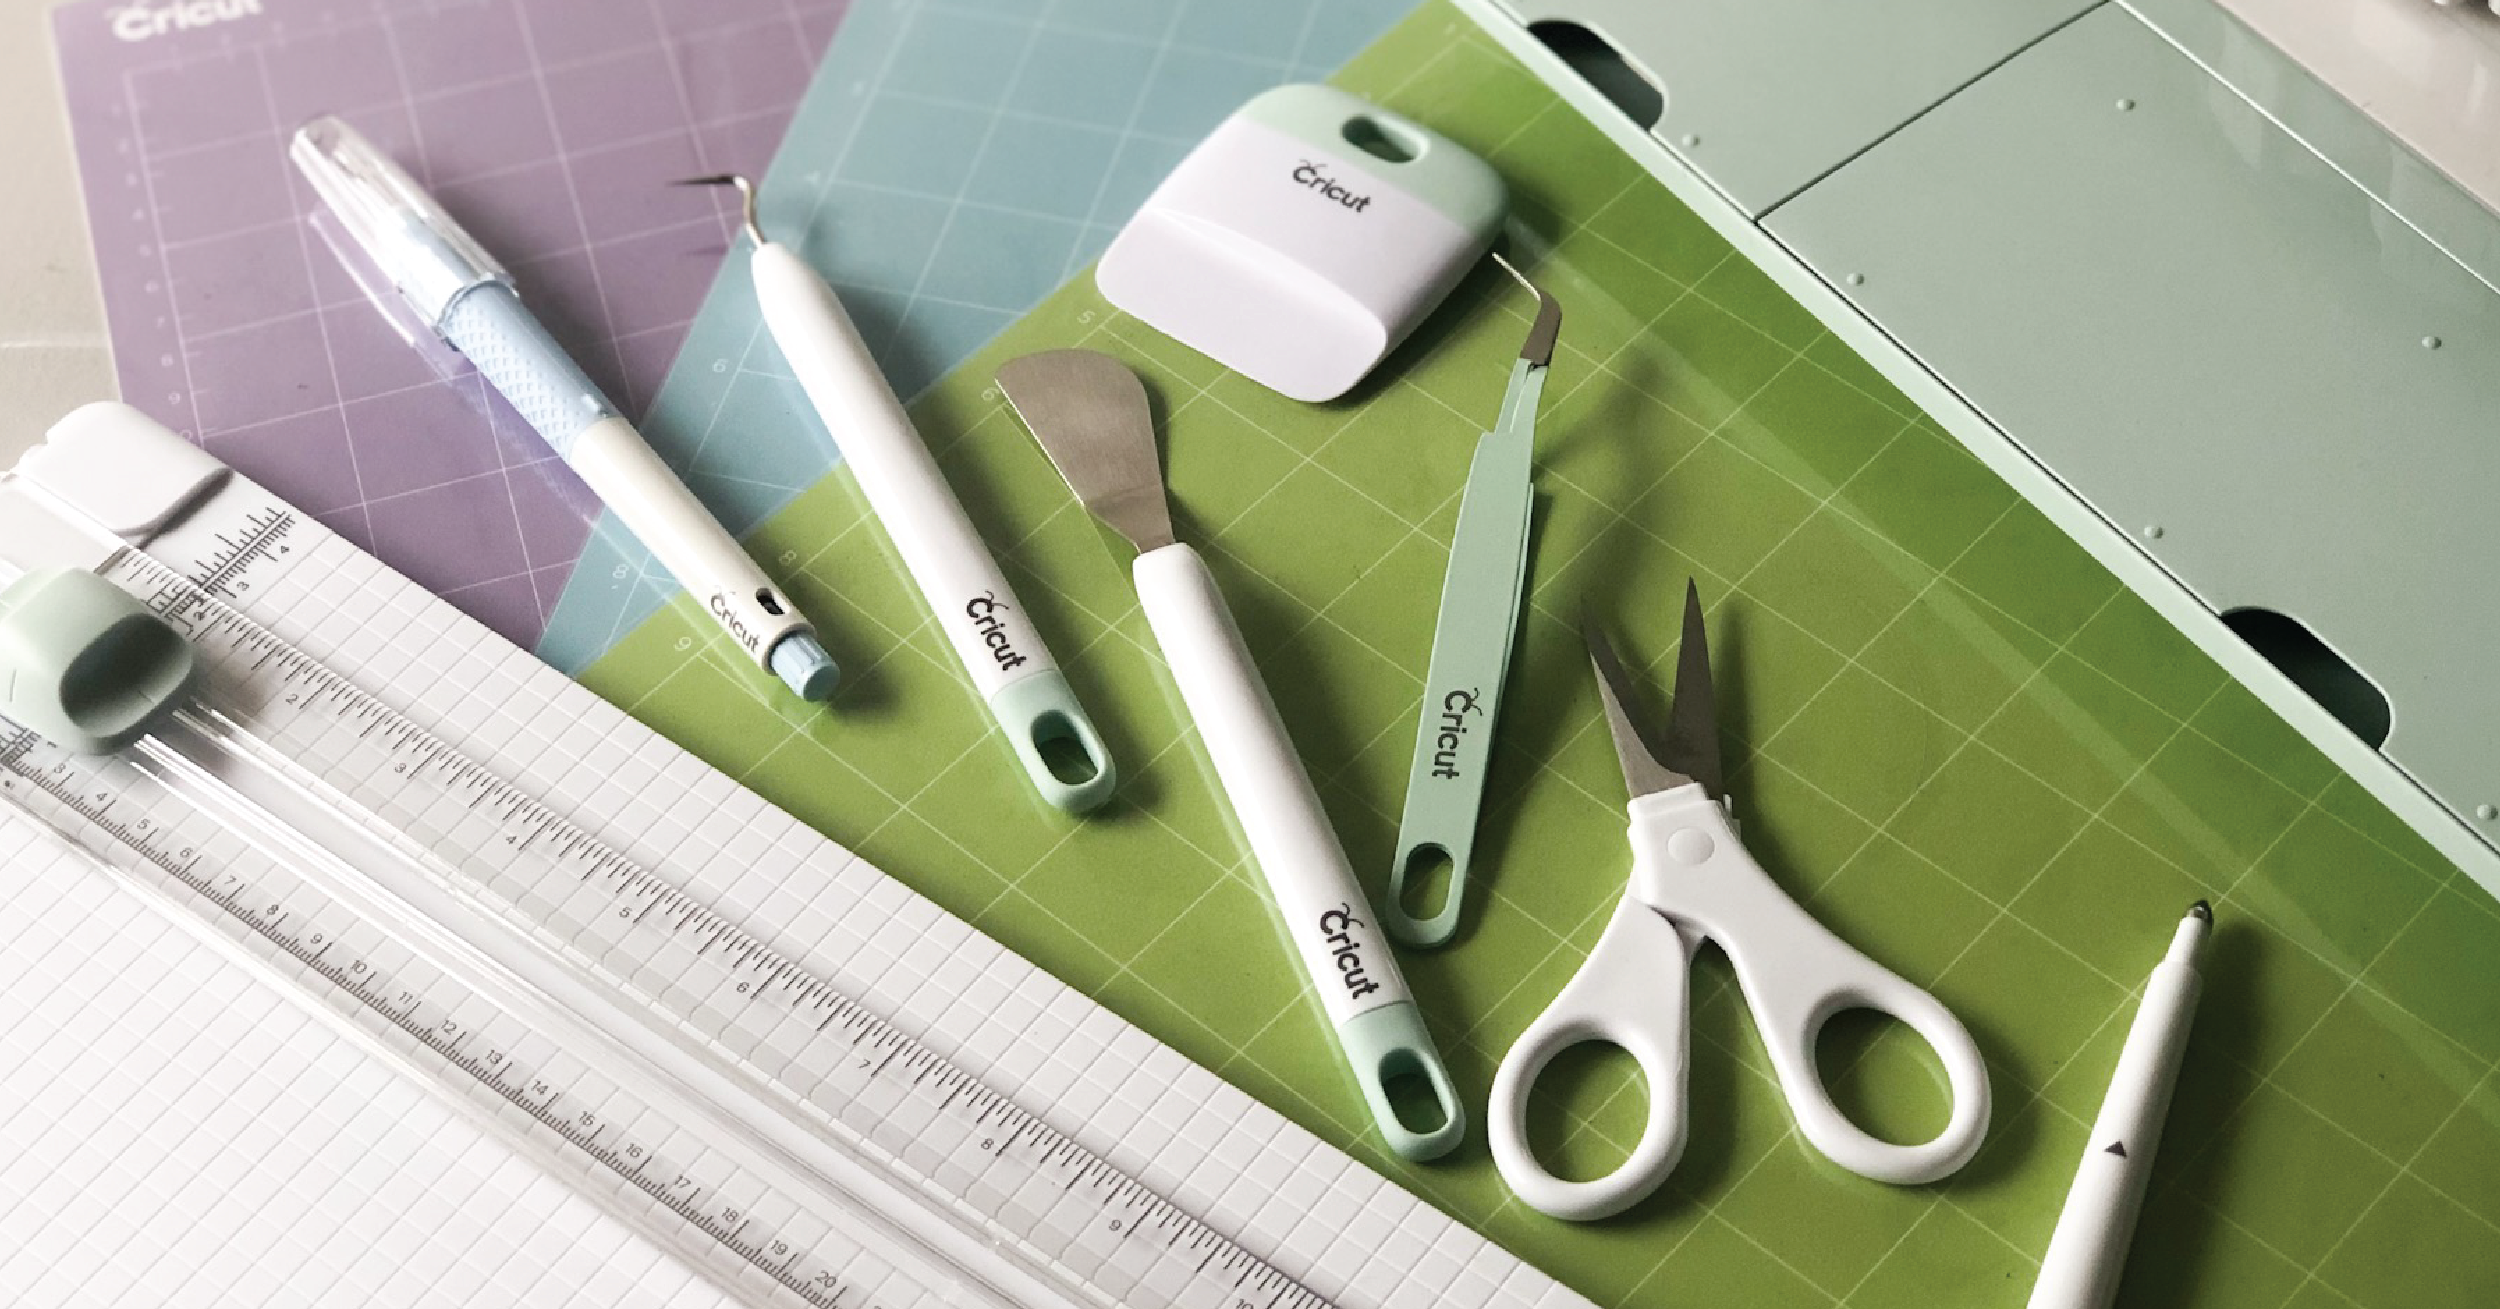 Cricut Maker Knife Blade and Housing, Wavy Blade and Engraving Tip